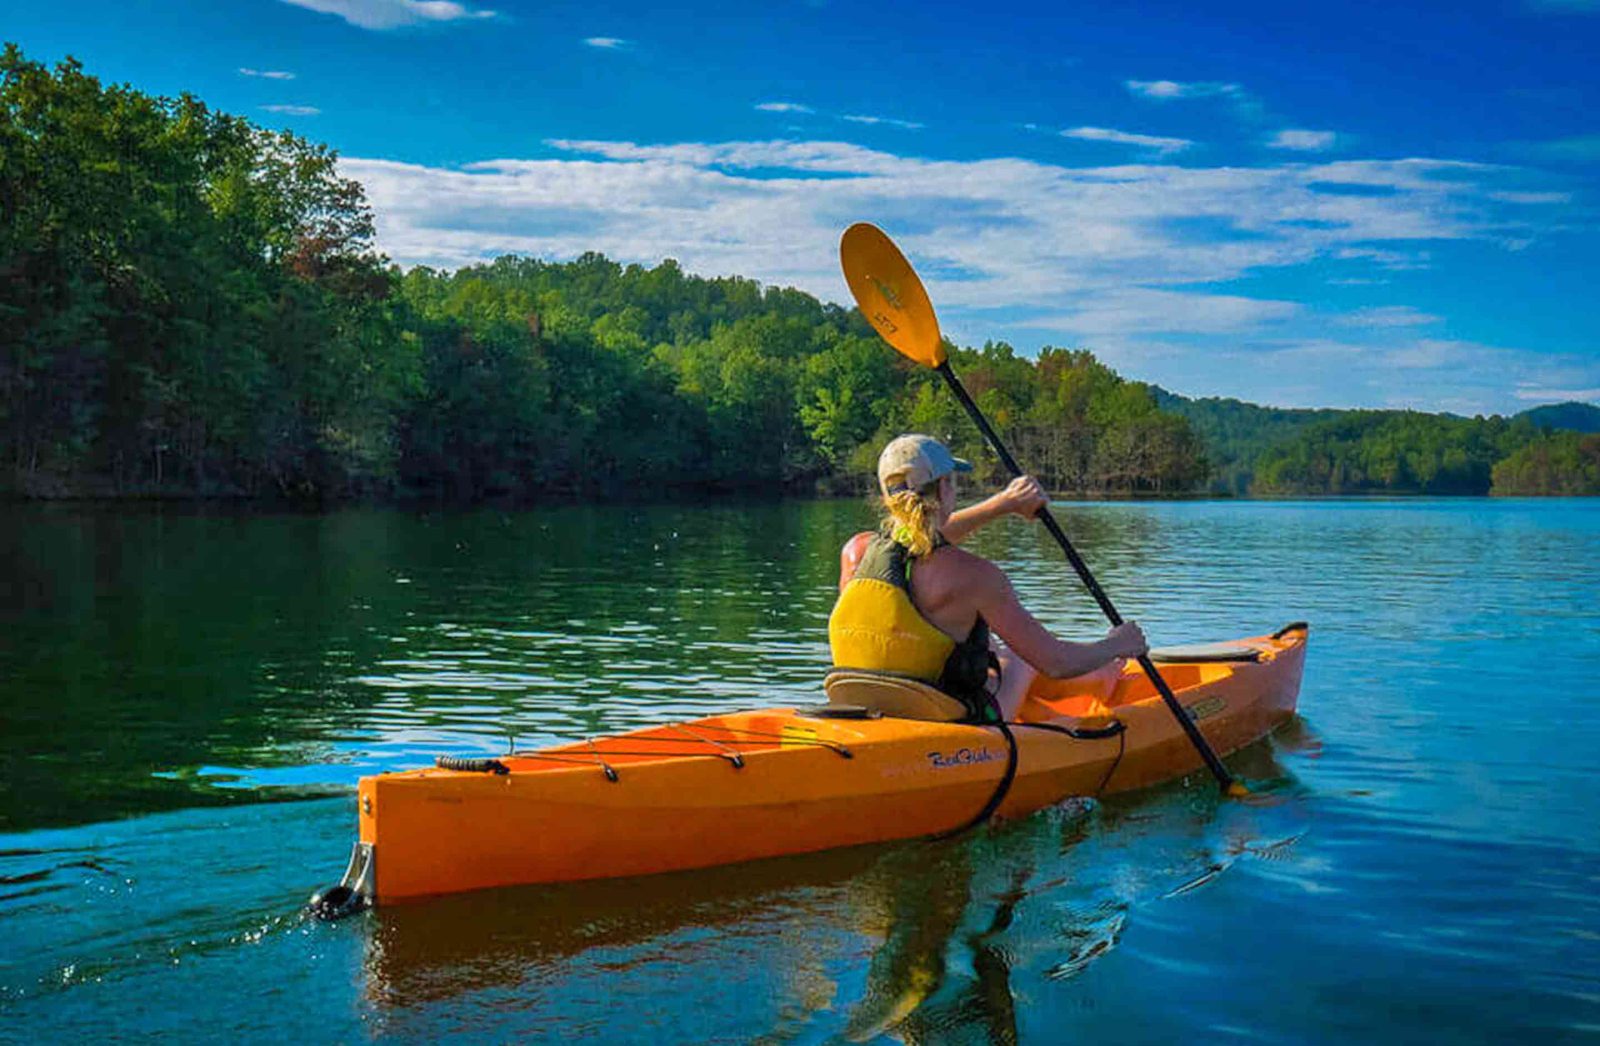 Exciting used kayak canoe For Thrill And Adventure 